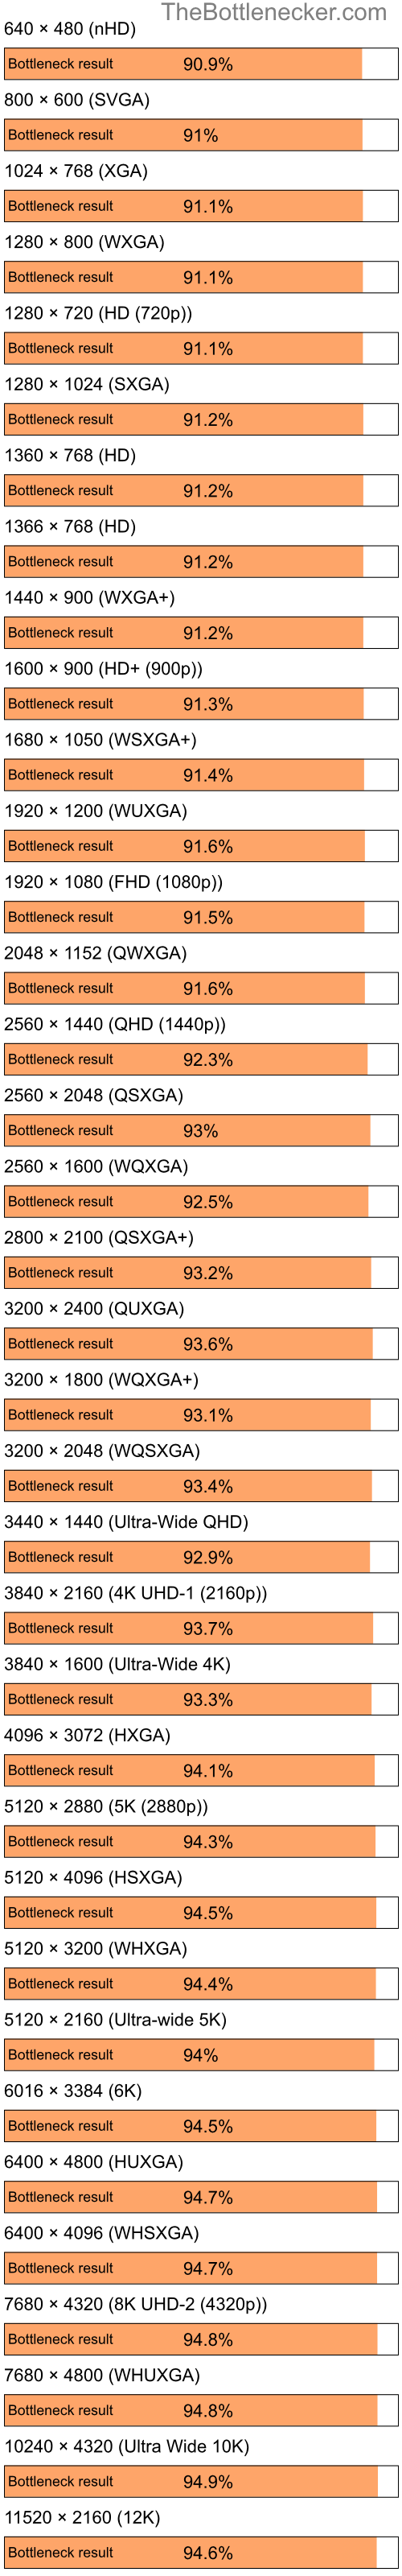 Bottleneck results by resolution for Intel Celeron and NVIDIA GeForce4 MX 4000 in Graphic Card Intense Tasks